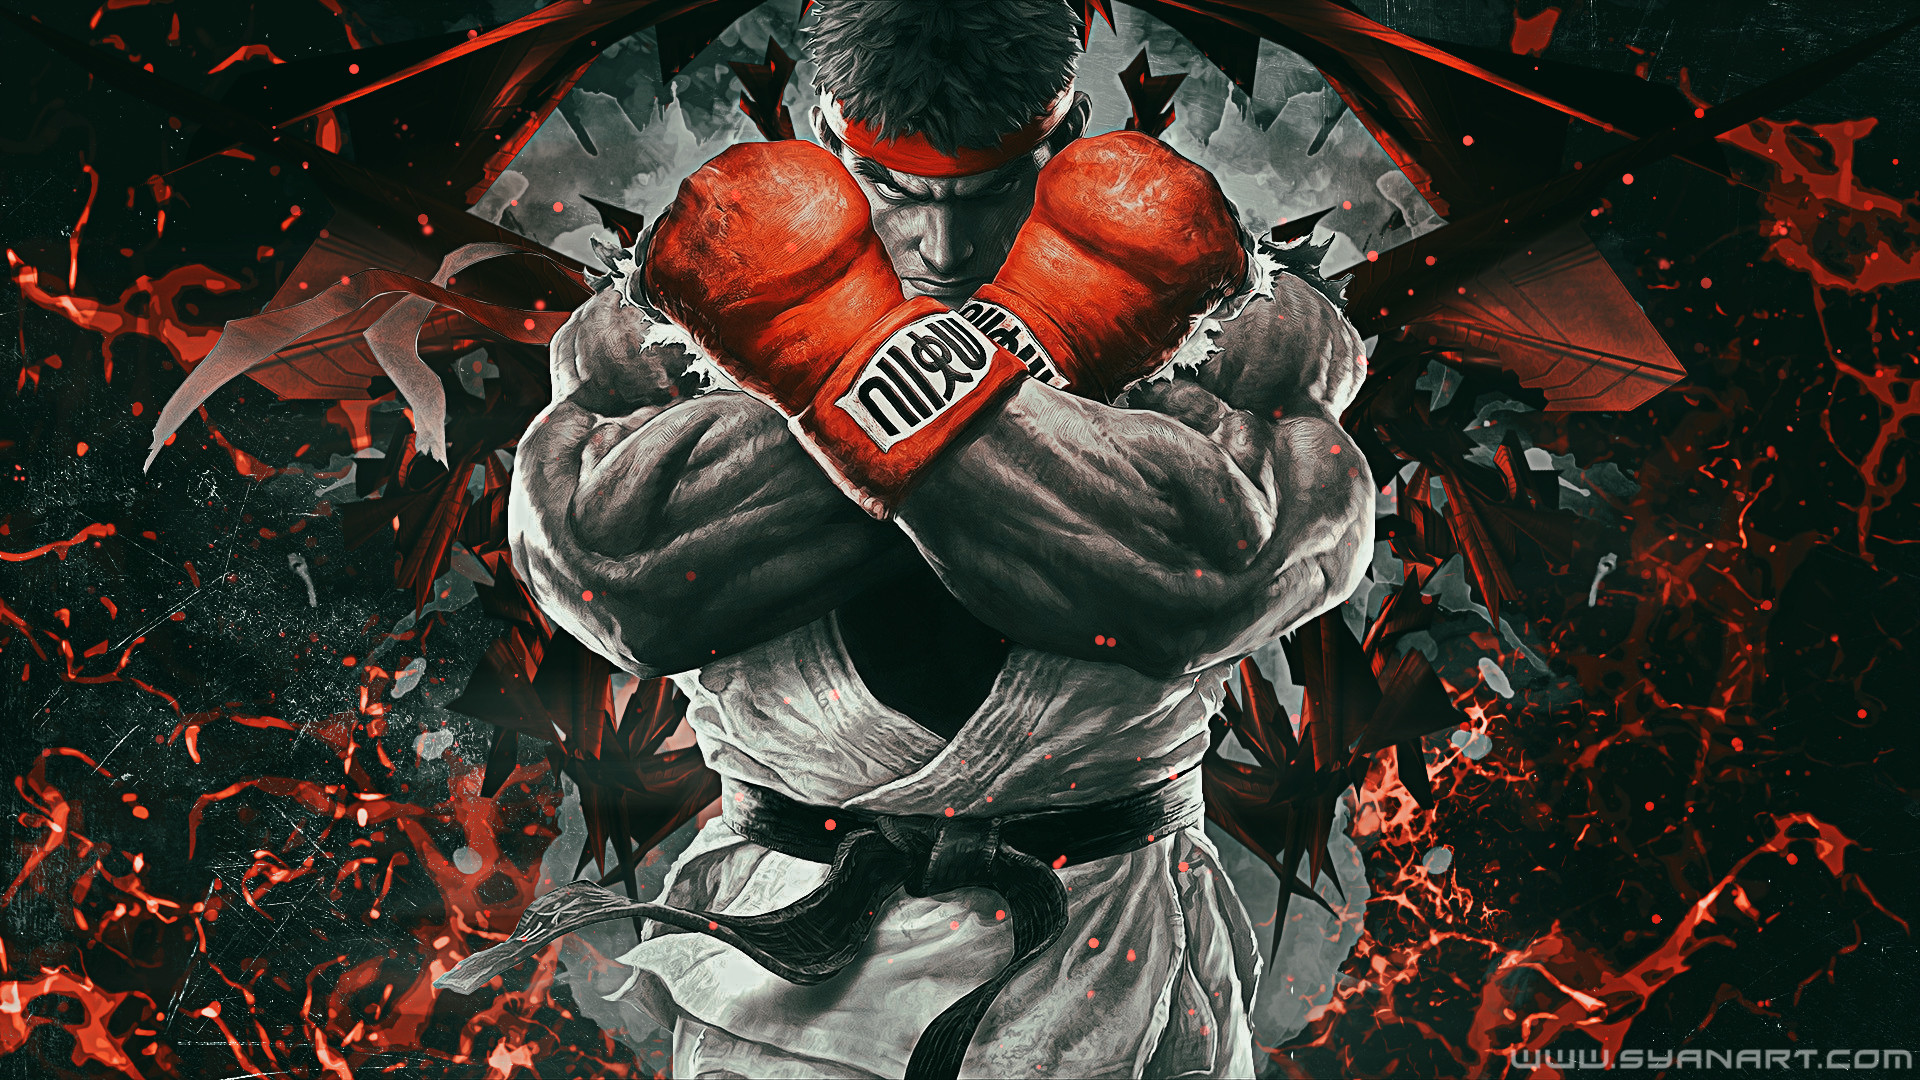 1920x1080 1920x1200 Ryu - Street Fighter wallpaper - Game wallpapers - #25720